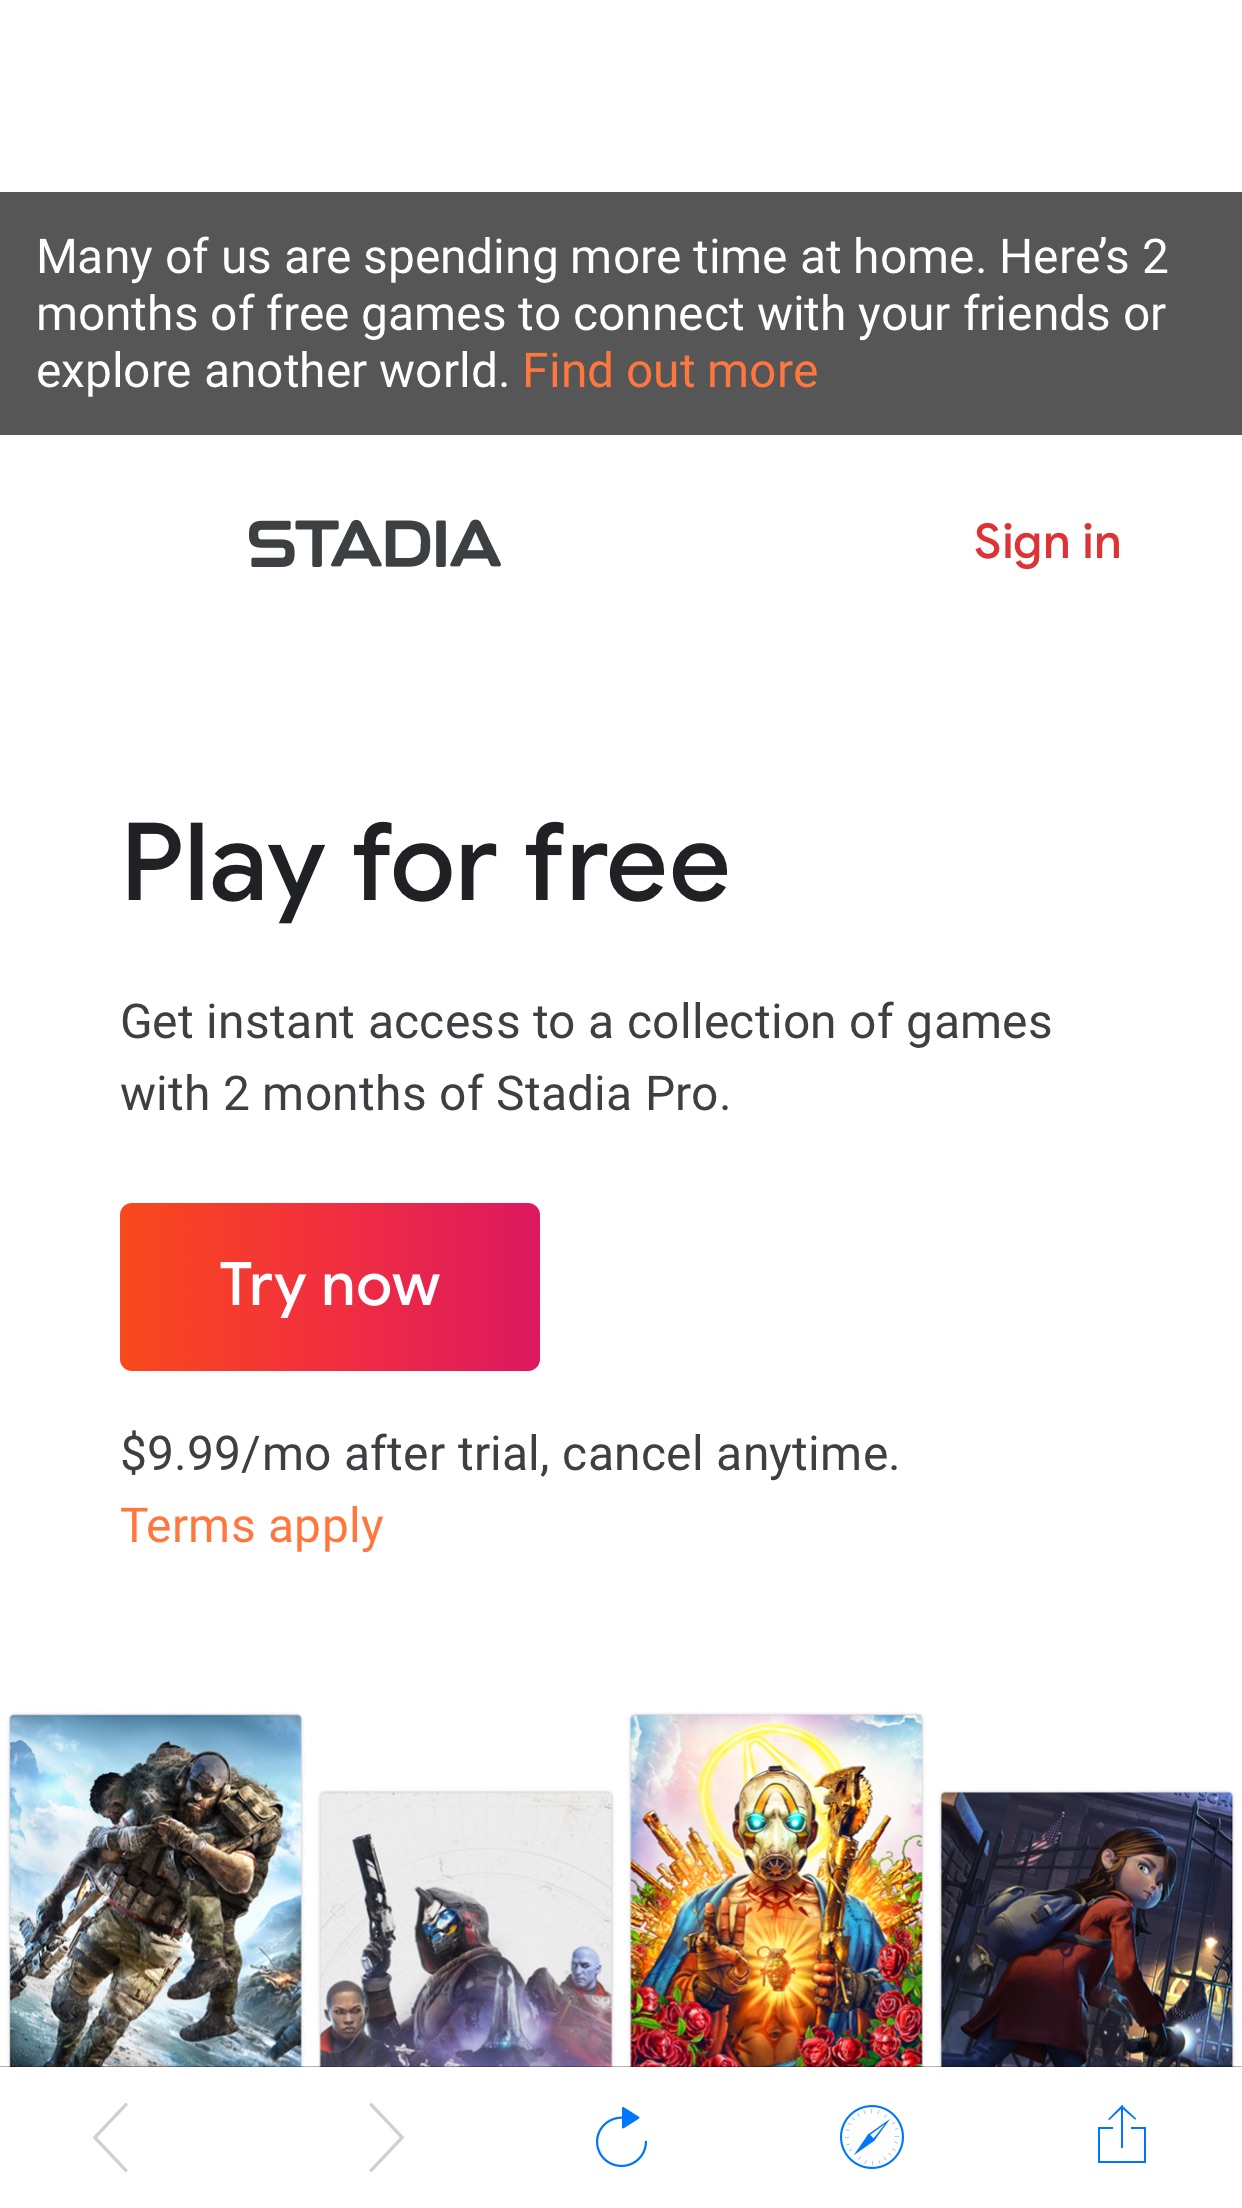 Stadia - One place for all the ways we play 谷歌云游戏平台